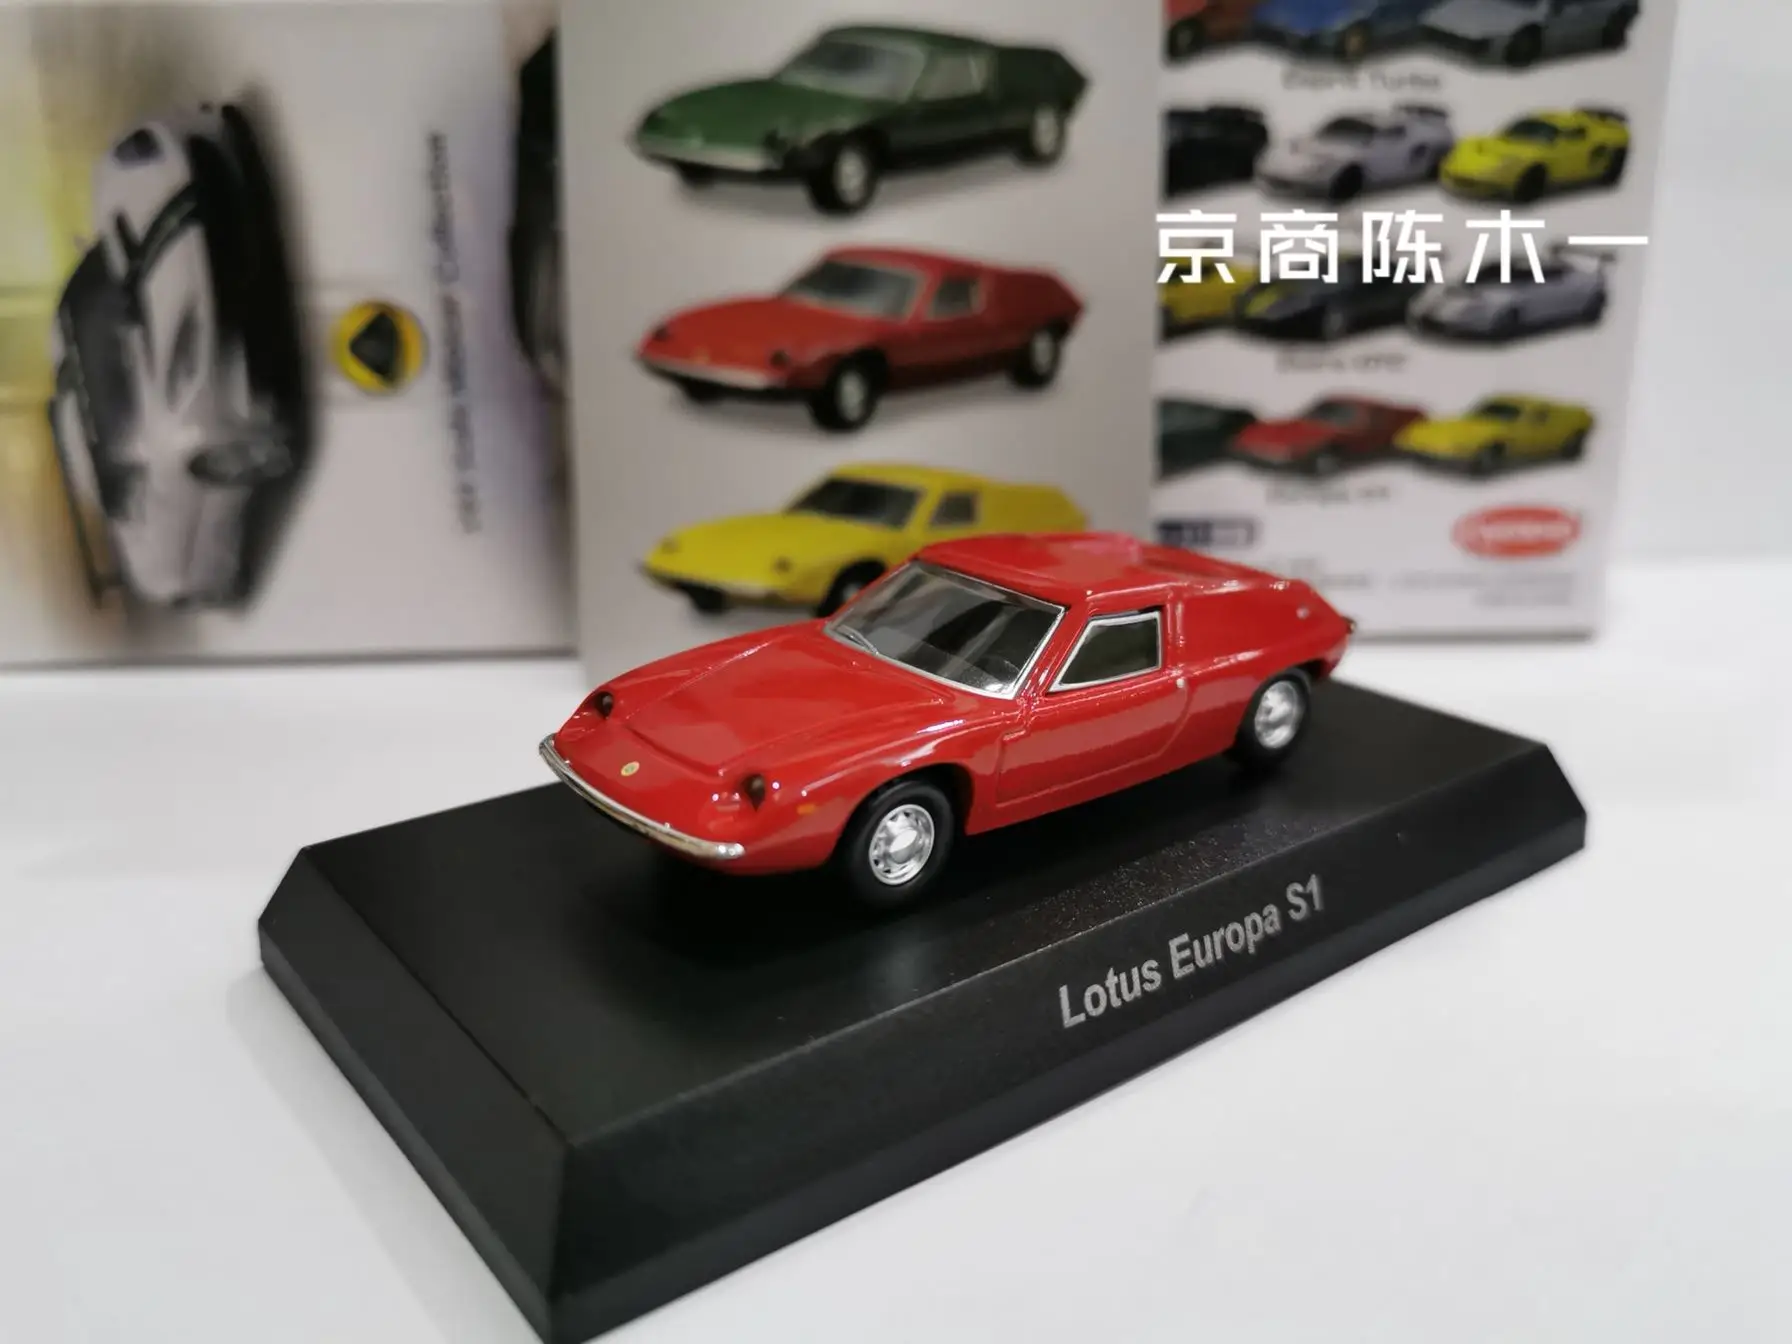 

1/64 KYOSHO Lotus Europa S1 collection die-cast alloy dolly model